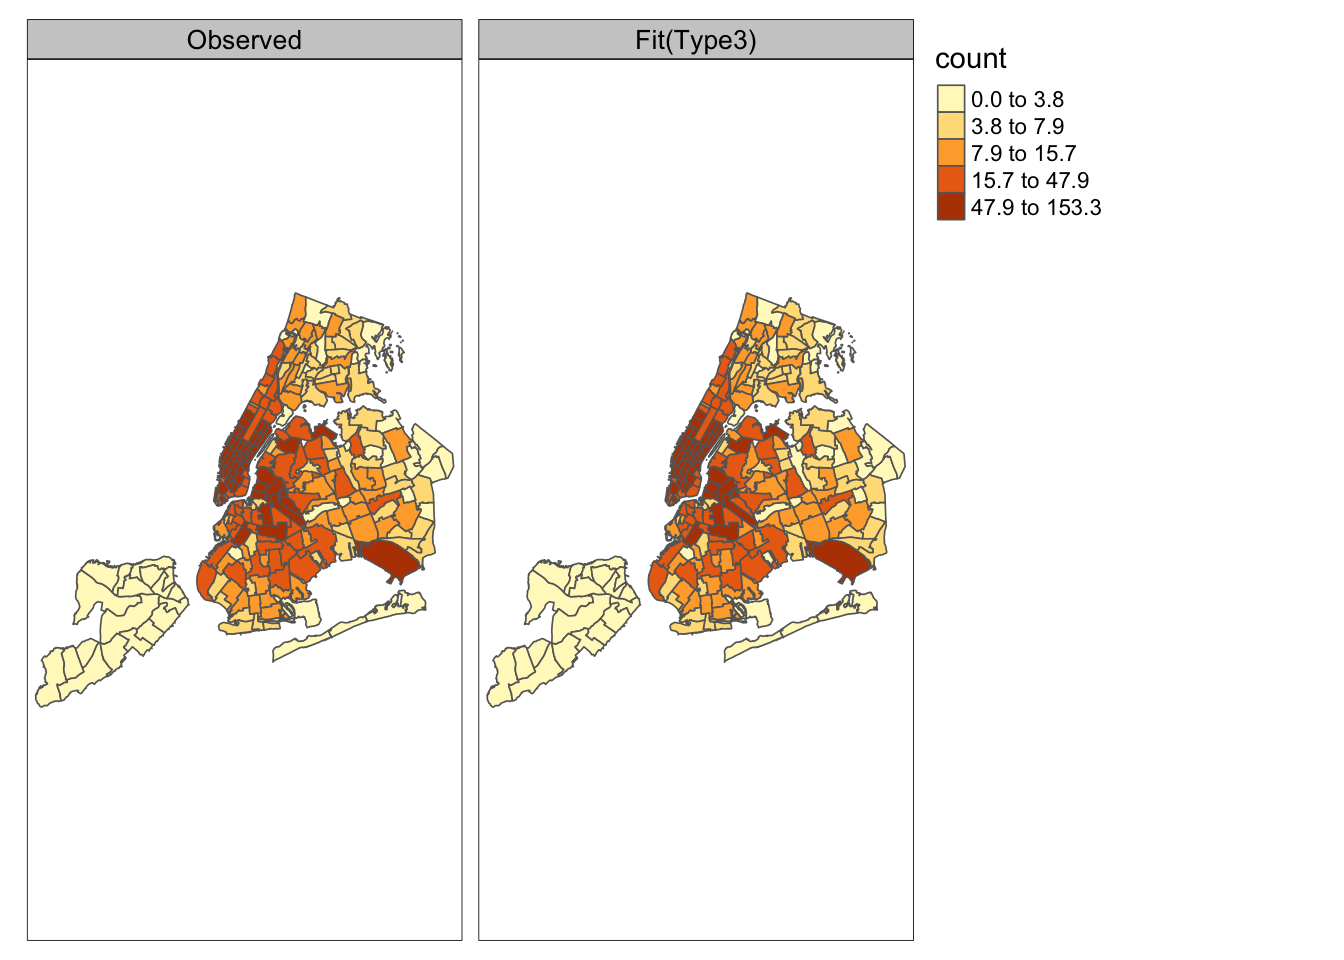 Observed monthly TNC counts (left) and time averaged fitted counts from Model KH3 (right) for g=252 zones.